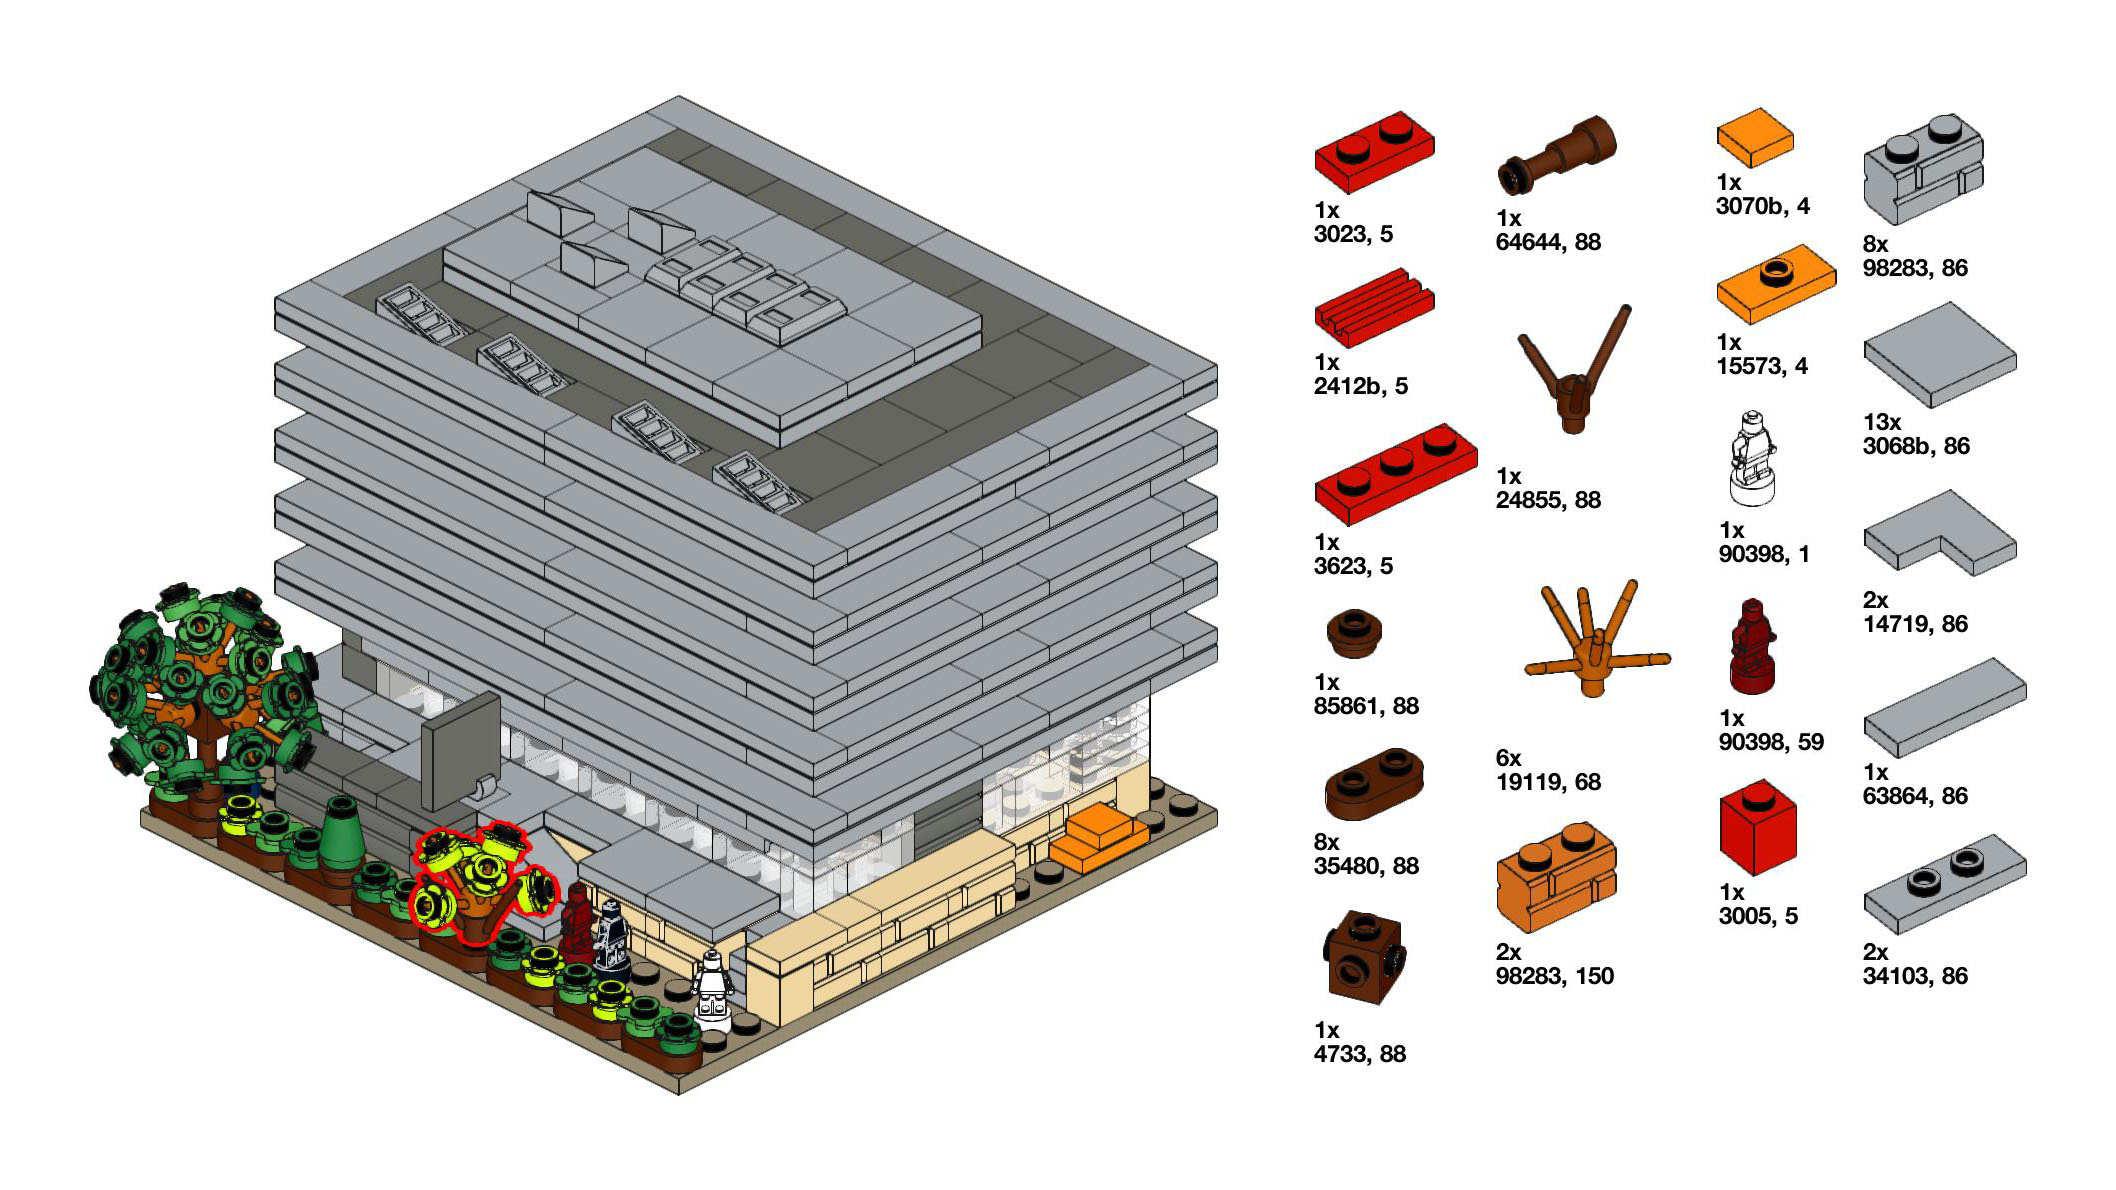 Classic Lego instructions showing Main Library made out of Lego and a partial parts inventory.